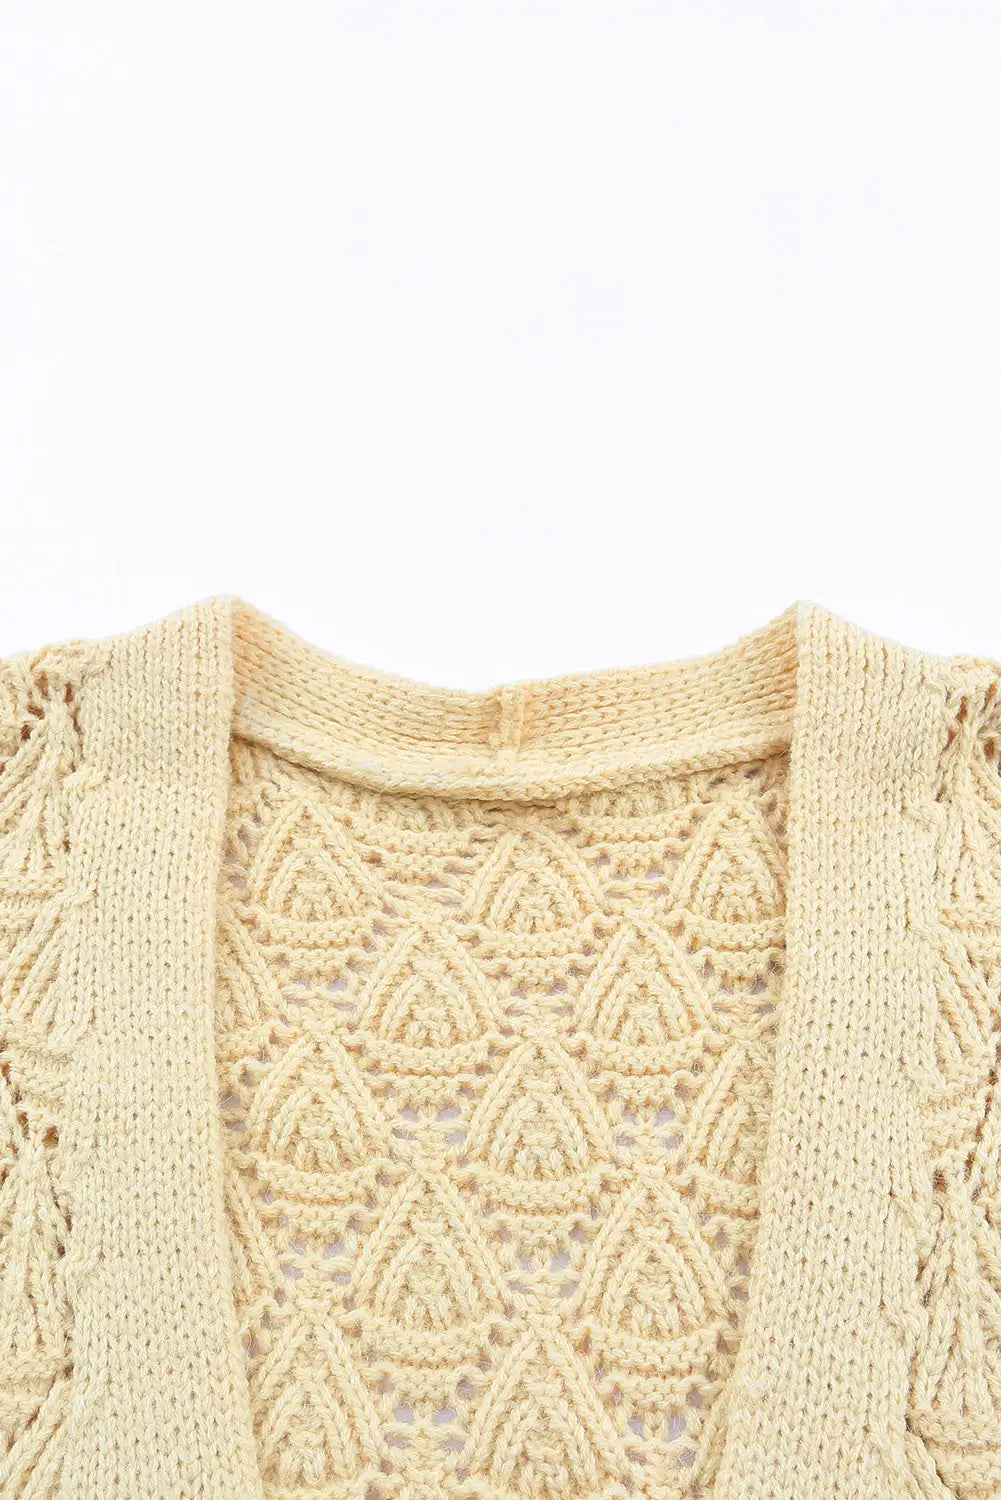 Khaki textured pocket knit open front cardigan - sweaters & cardigans